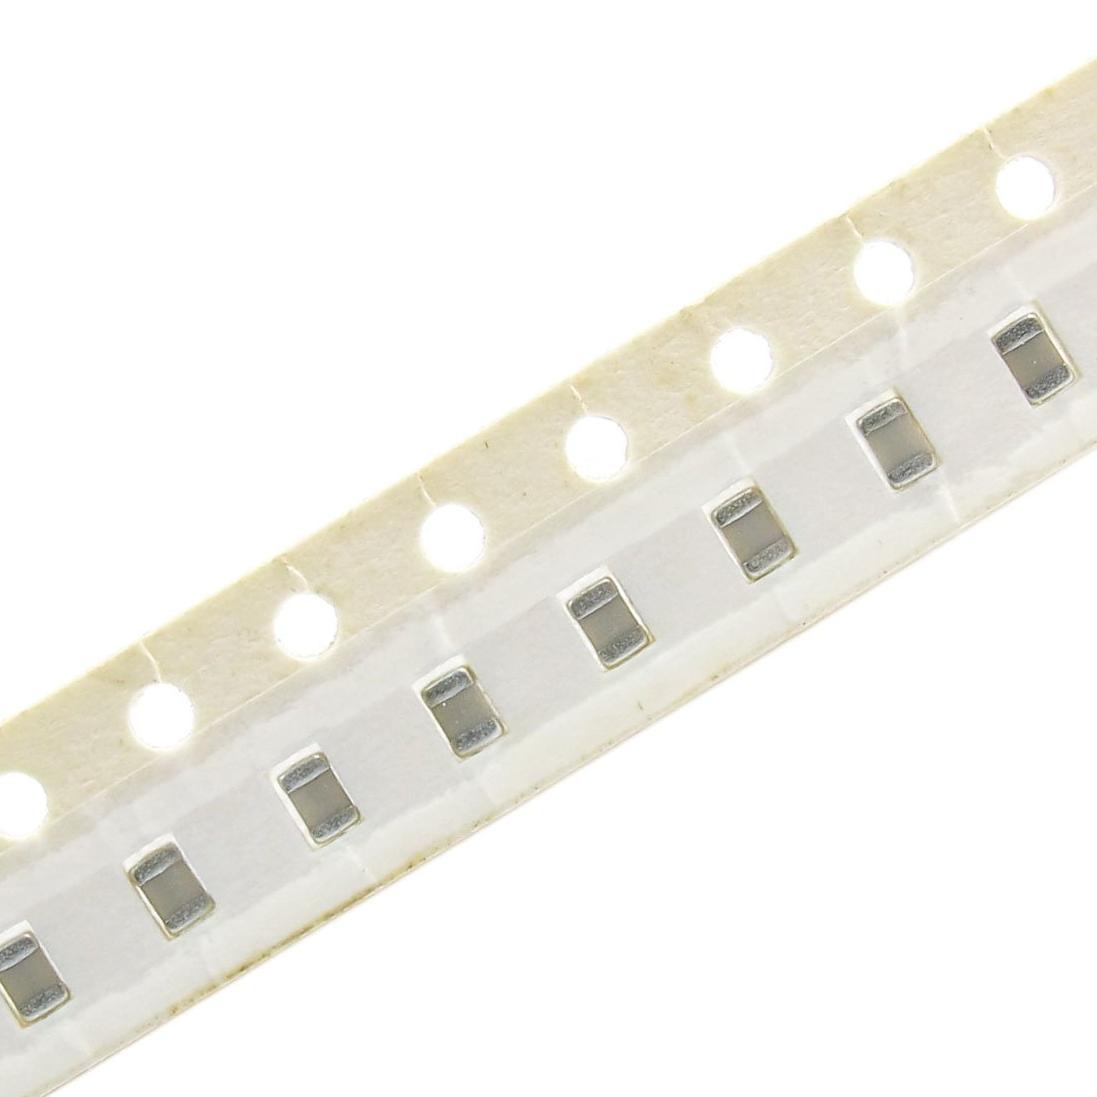  SMD 68pF 0805 C0G(NP0)